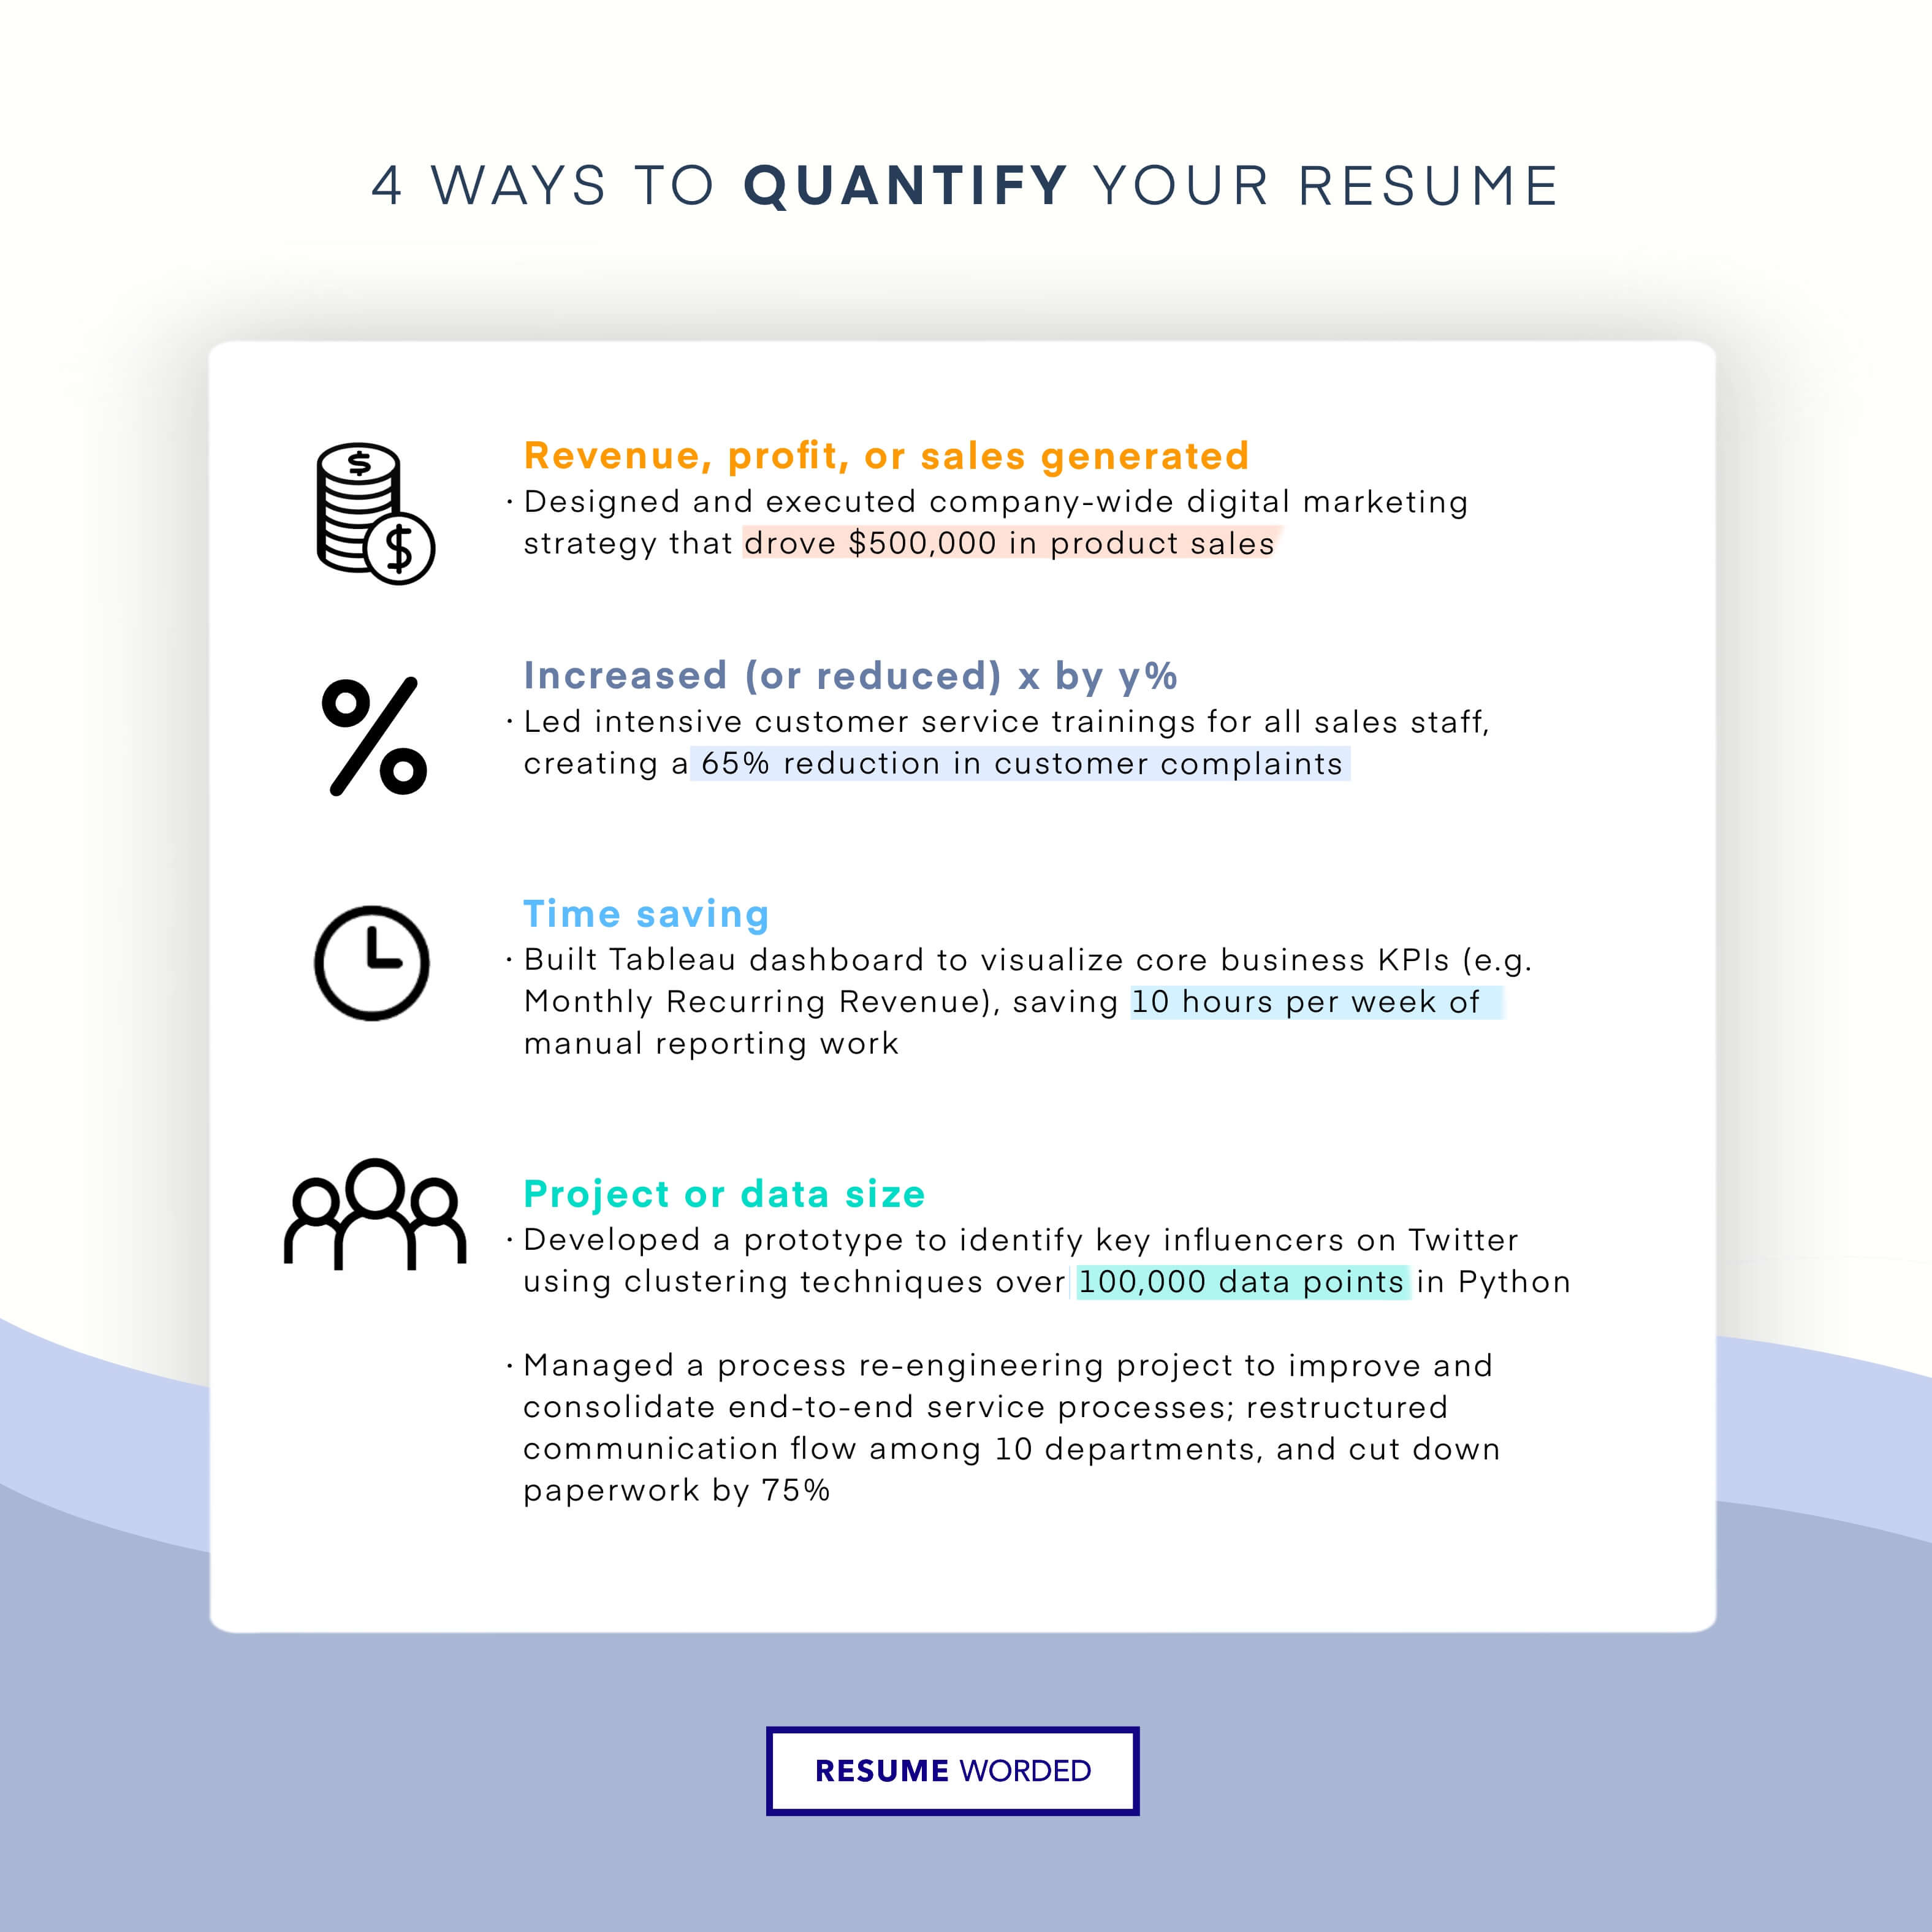 Quantify past sales-related accomplishments - Real Estate Agent Resume